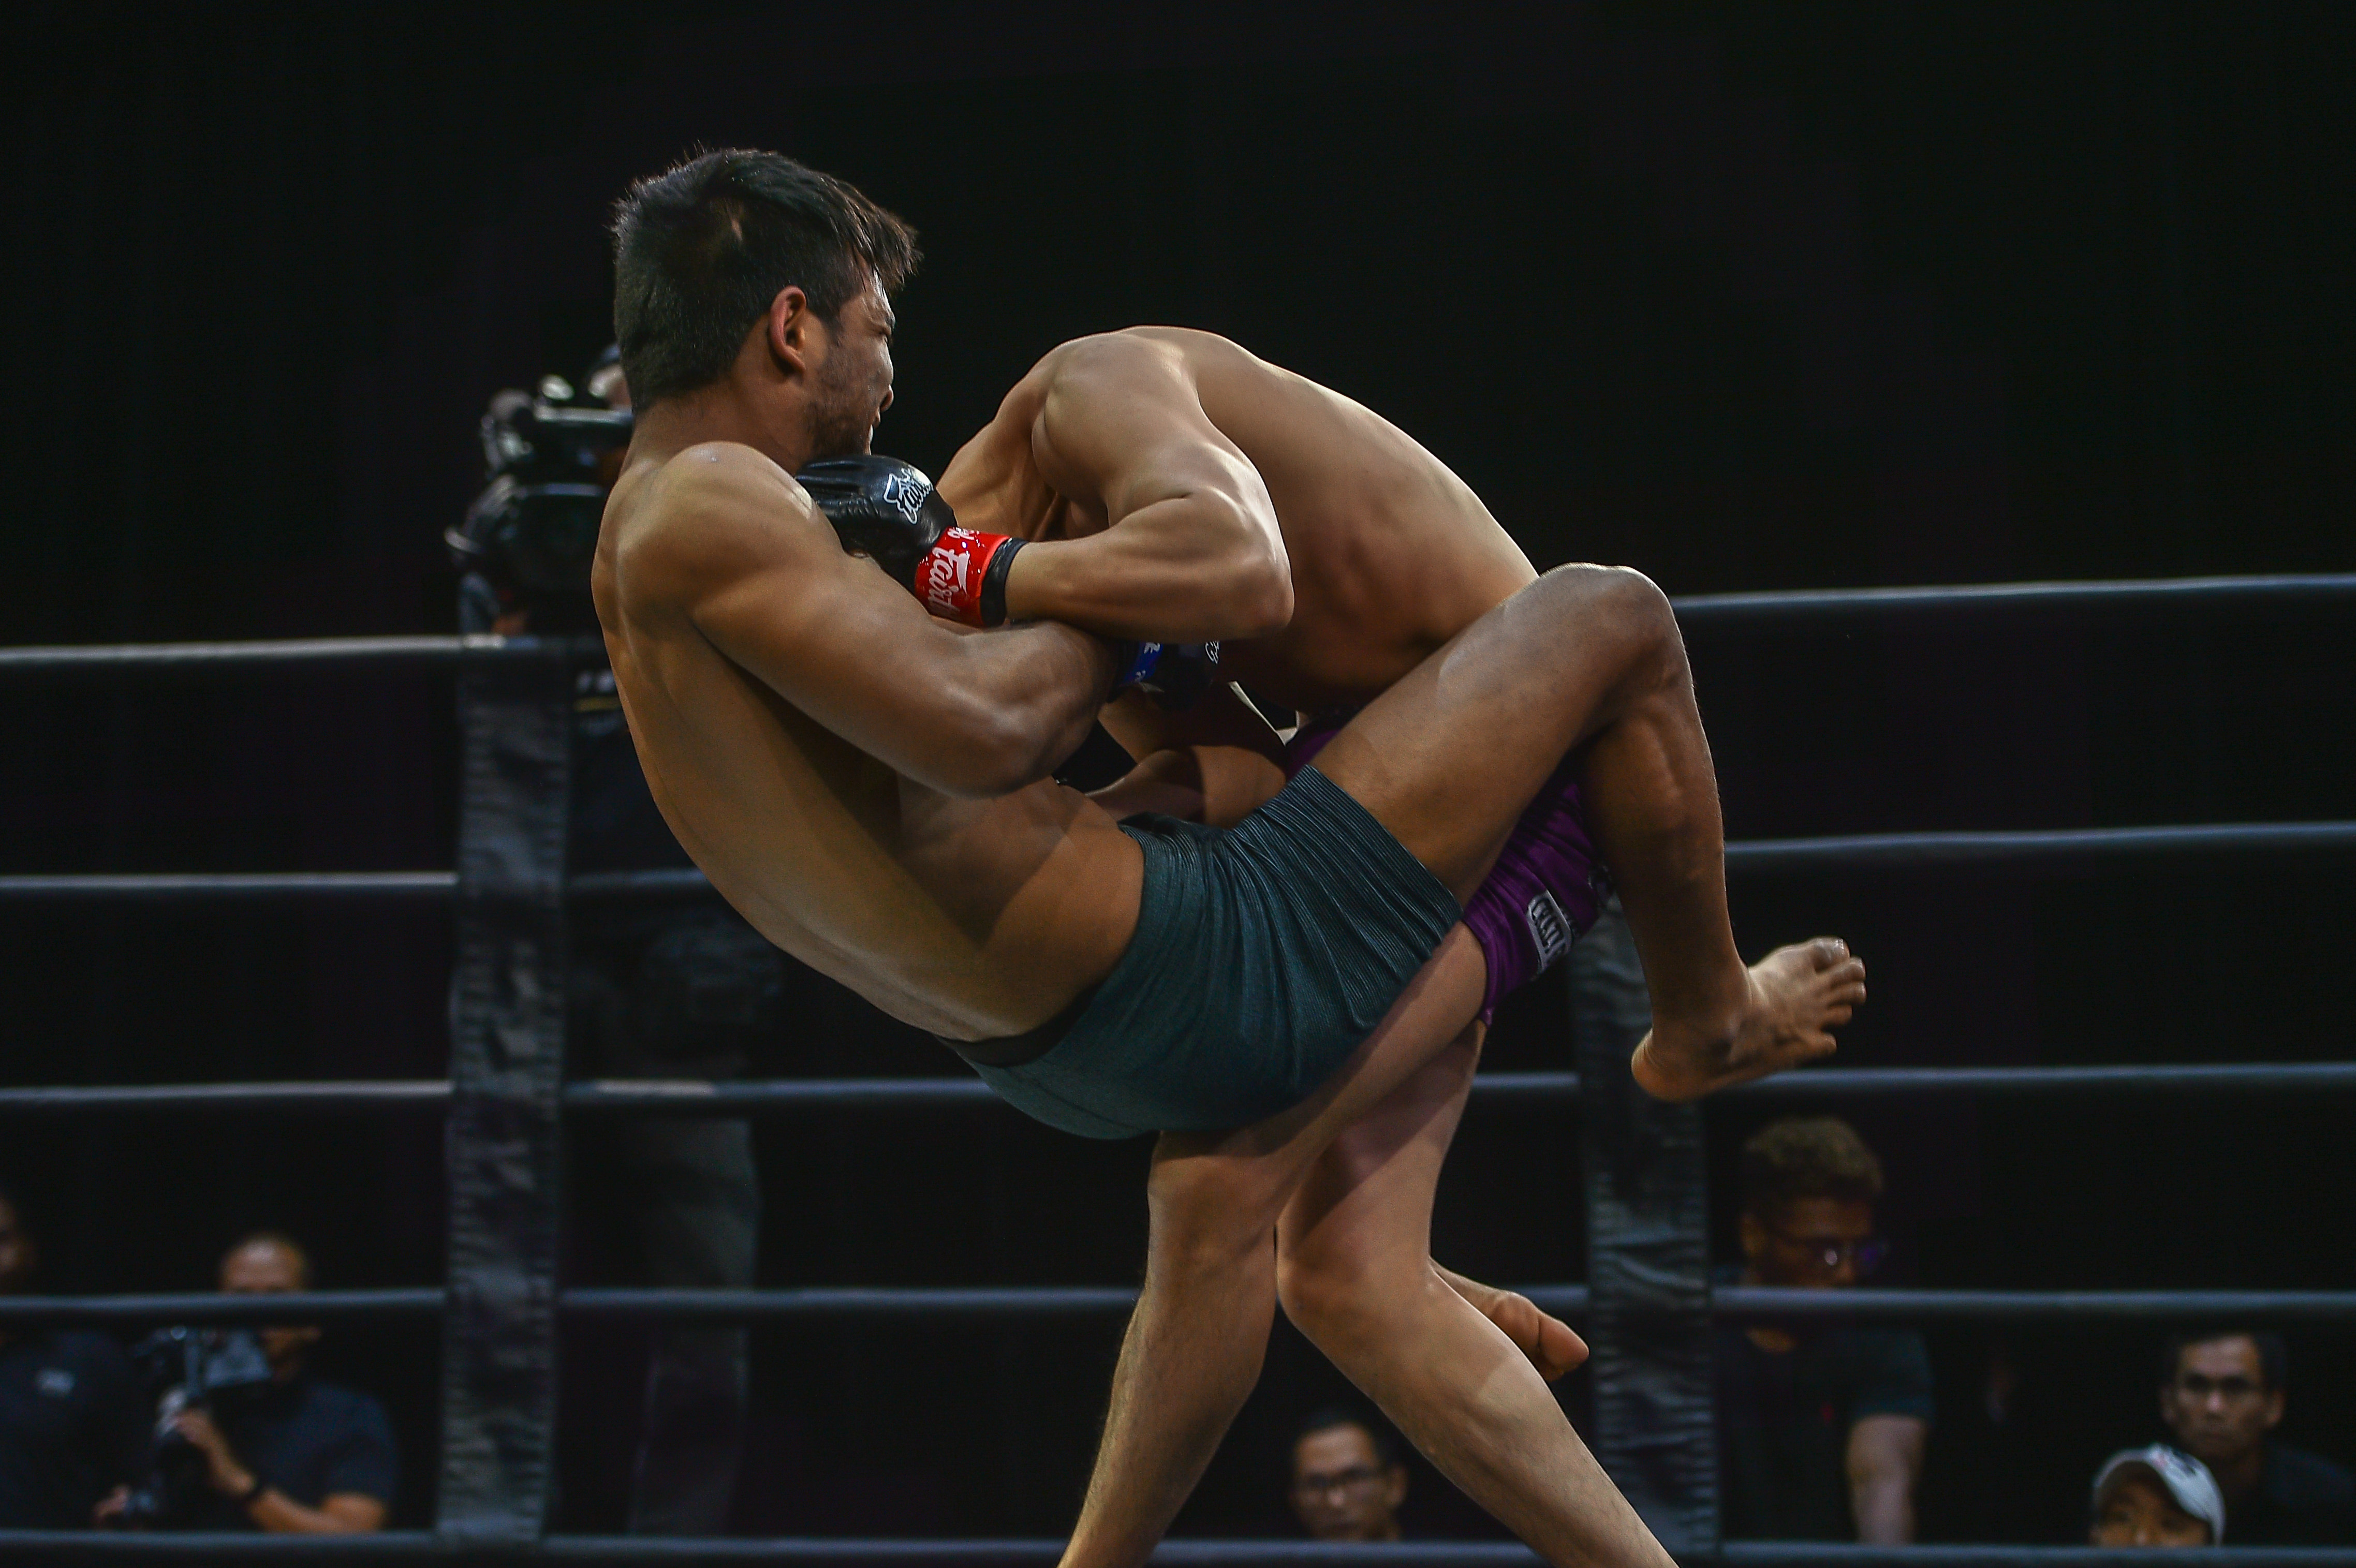 India's undefeated MMA fighter Rana Rudra Pratap Singh earns 1st ONE Warrior Series win, submits South Korea's Cho Seung Hyun in Singapore